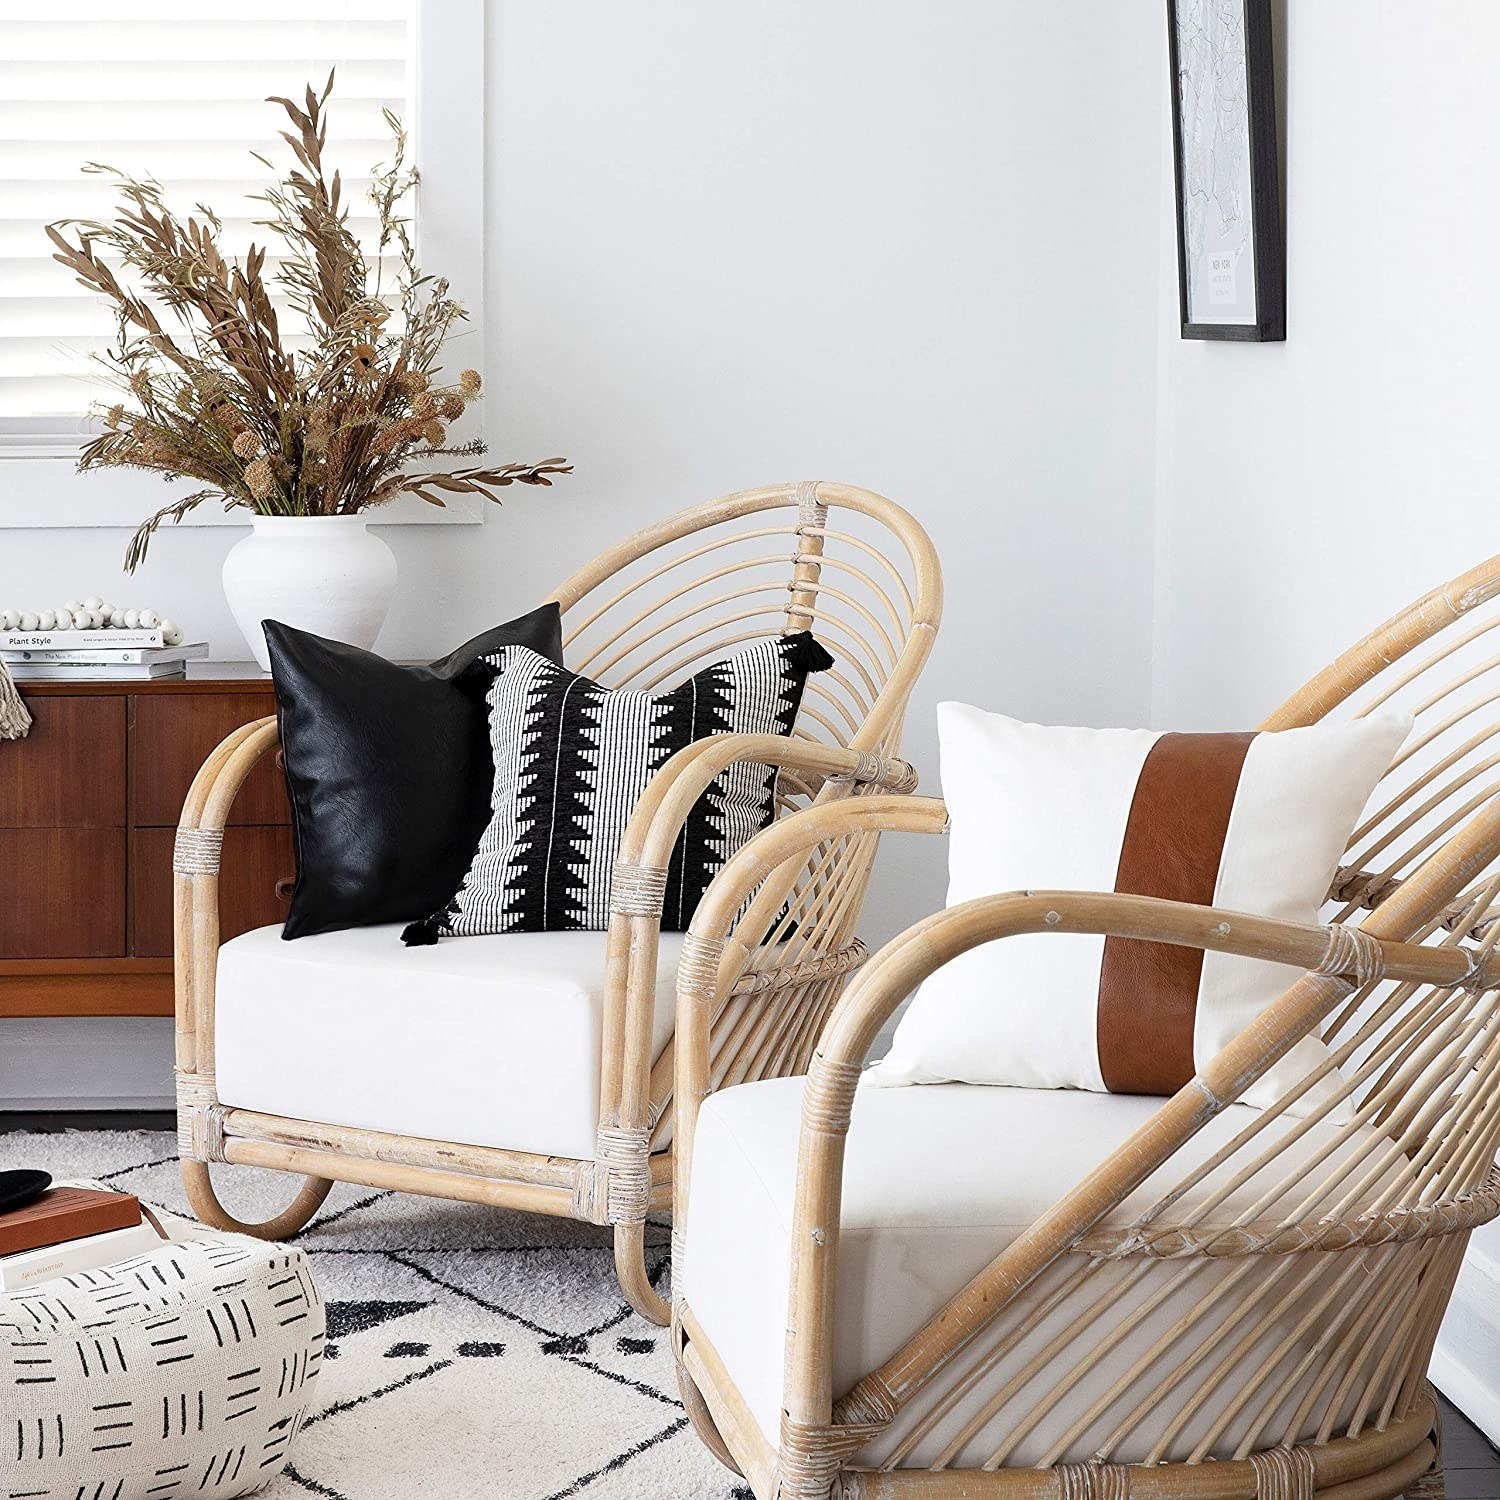 32 Ways To Make Your Home Look Like An “After” Shot On HGTV